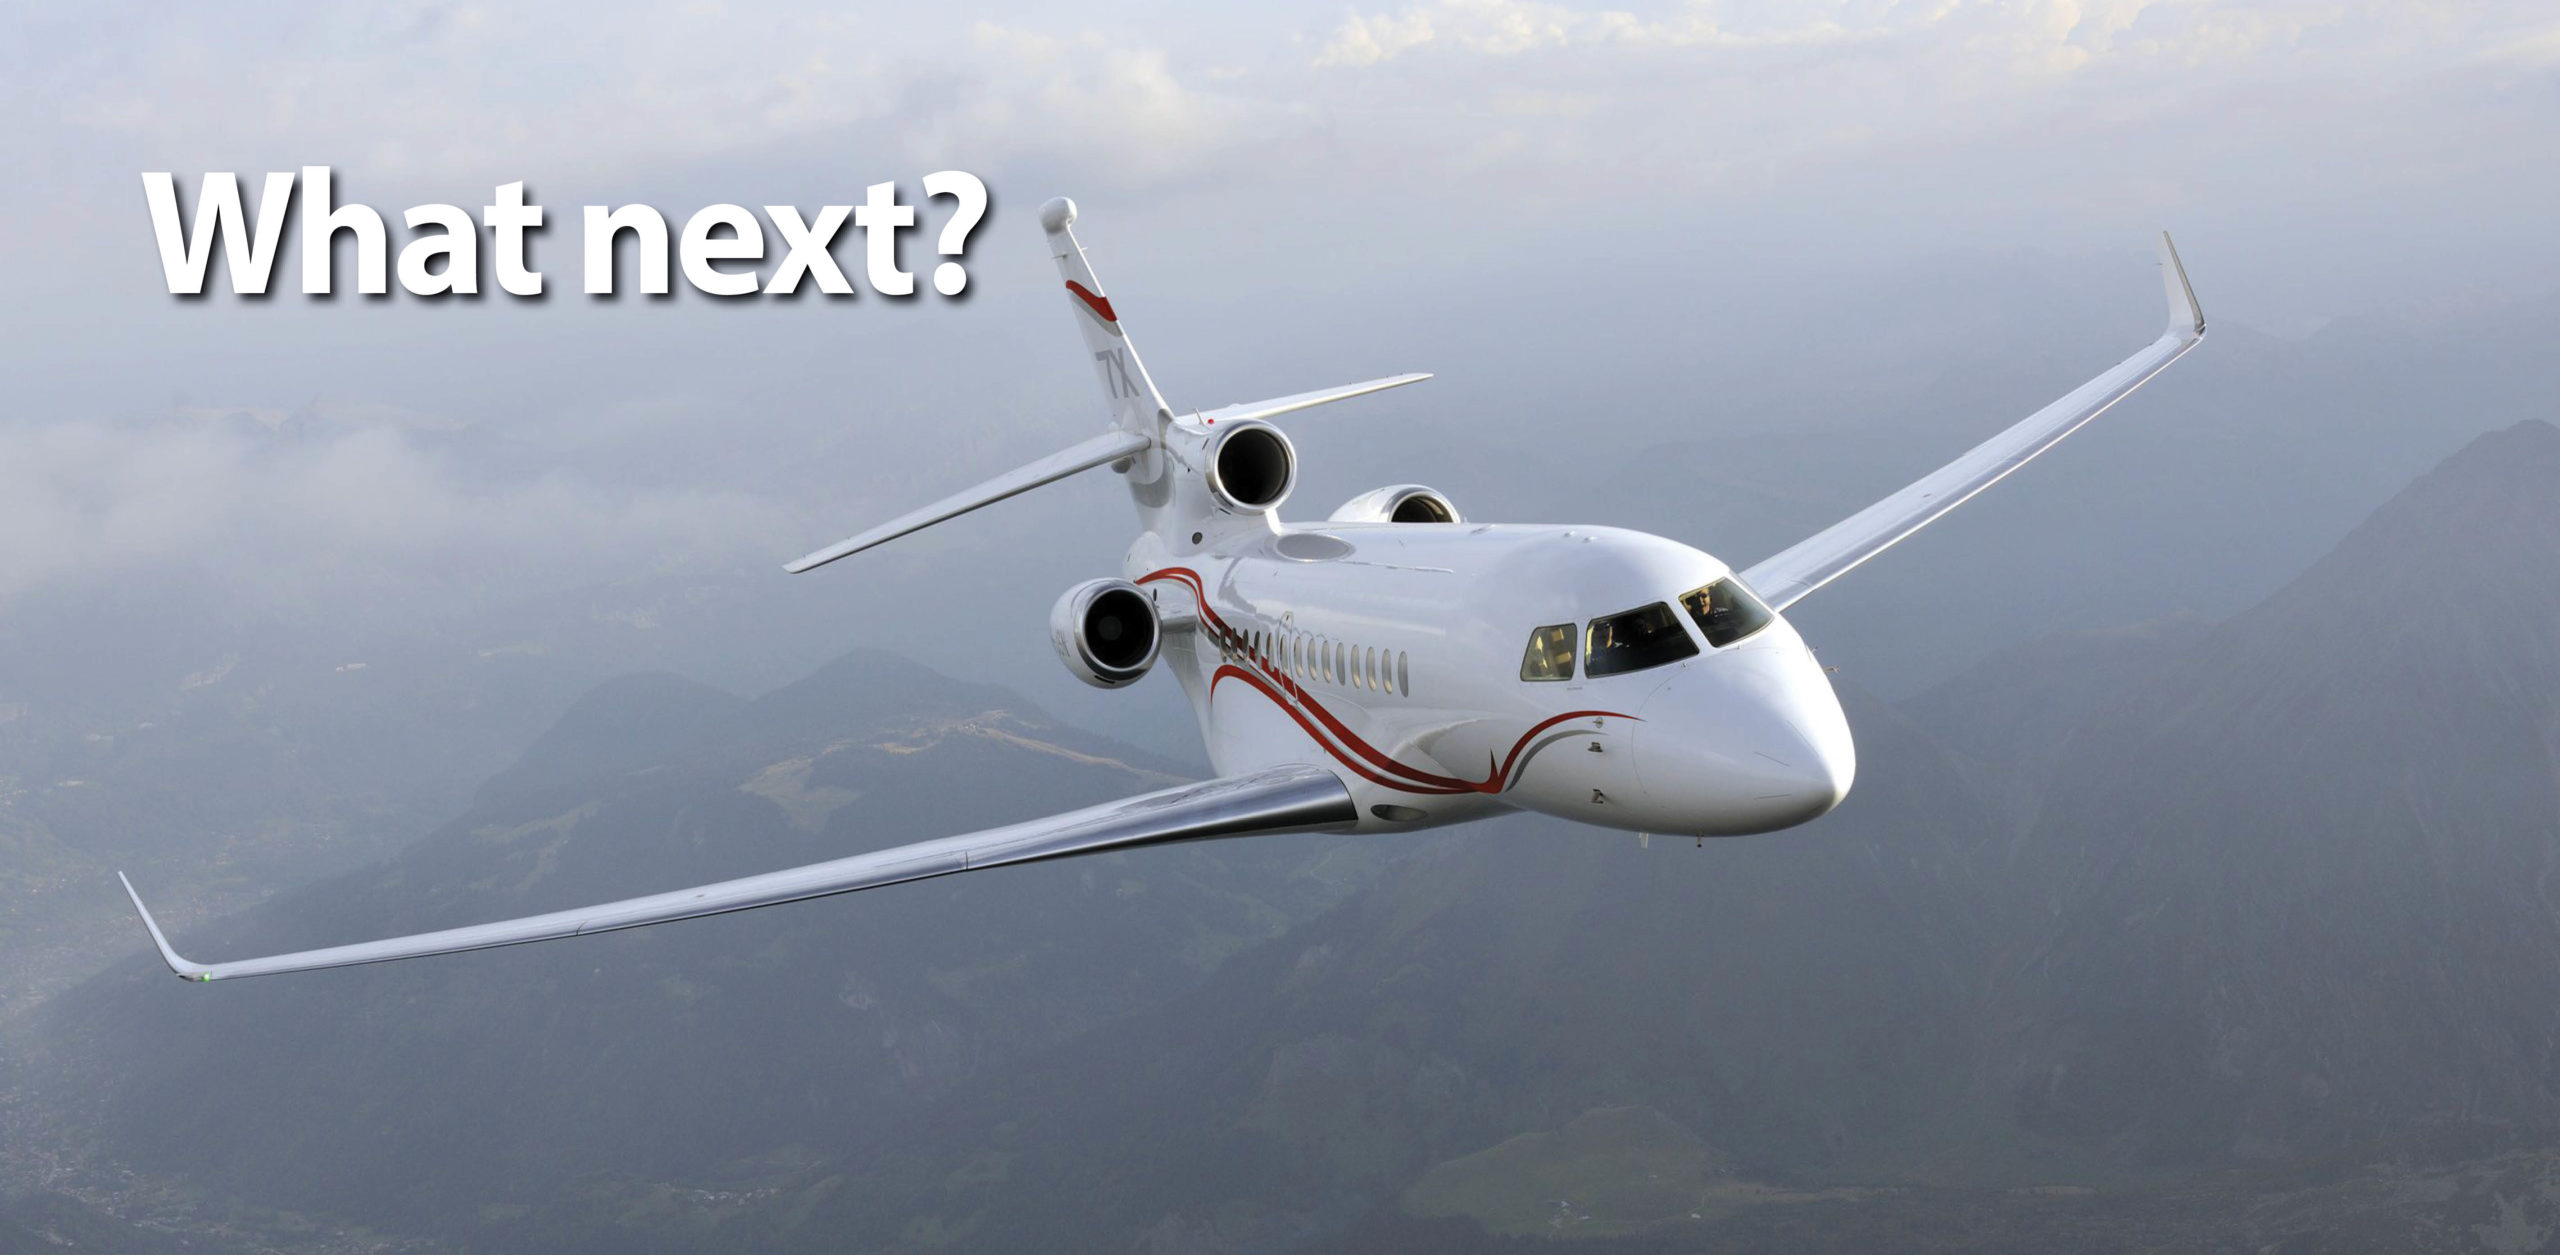 What is the next crisis for private aviation?